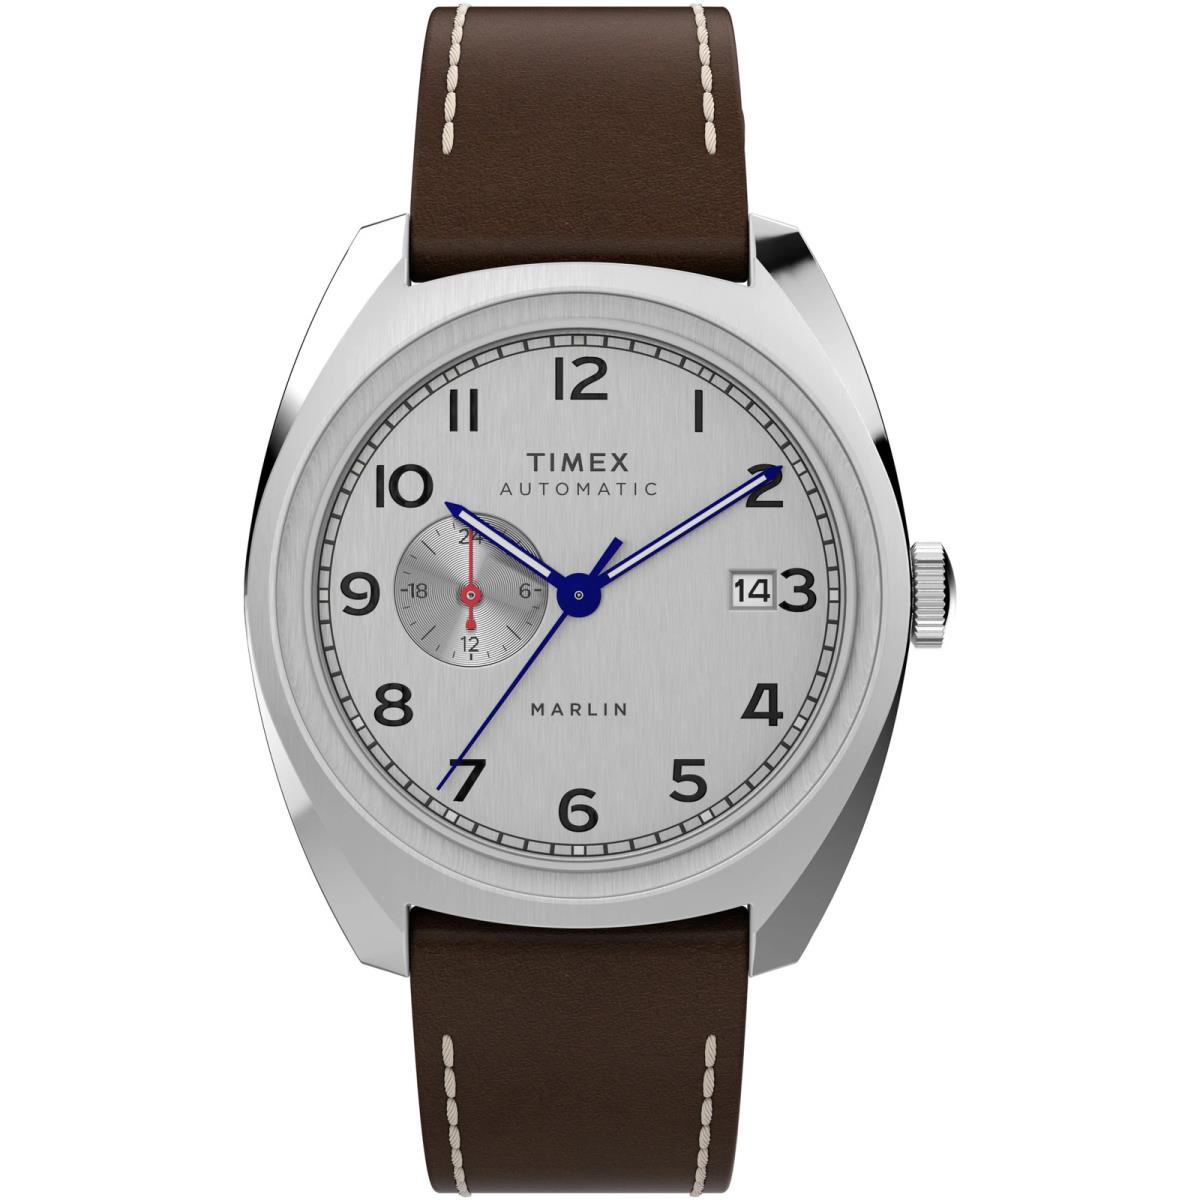 Timex Marlin Sub-dial Automatic 39mm White Watch